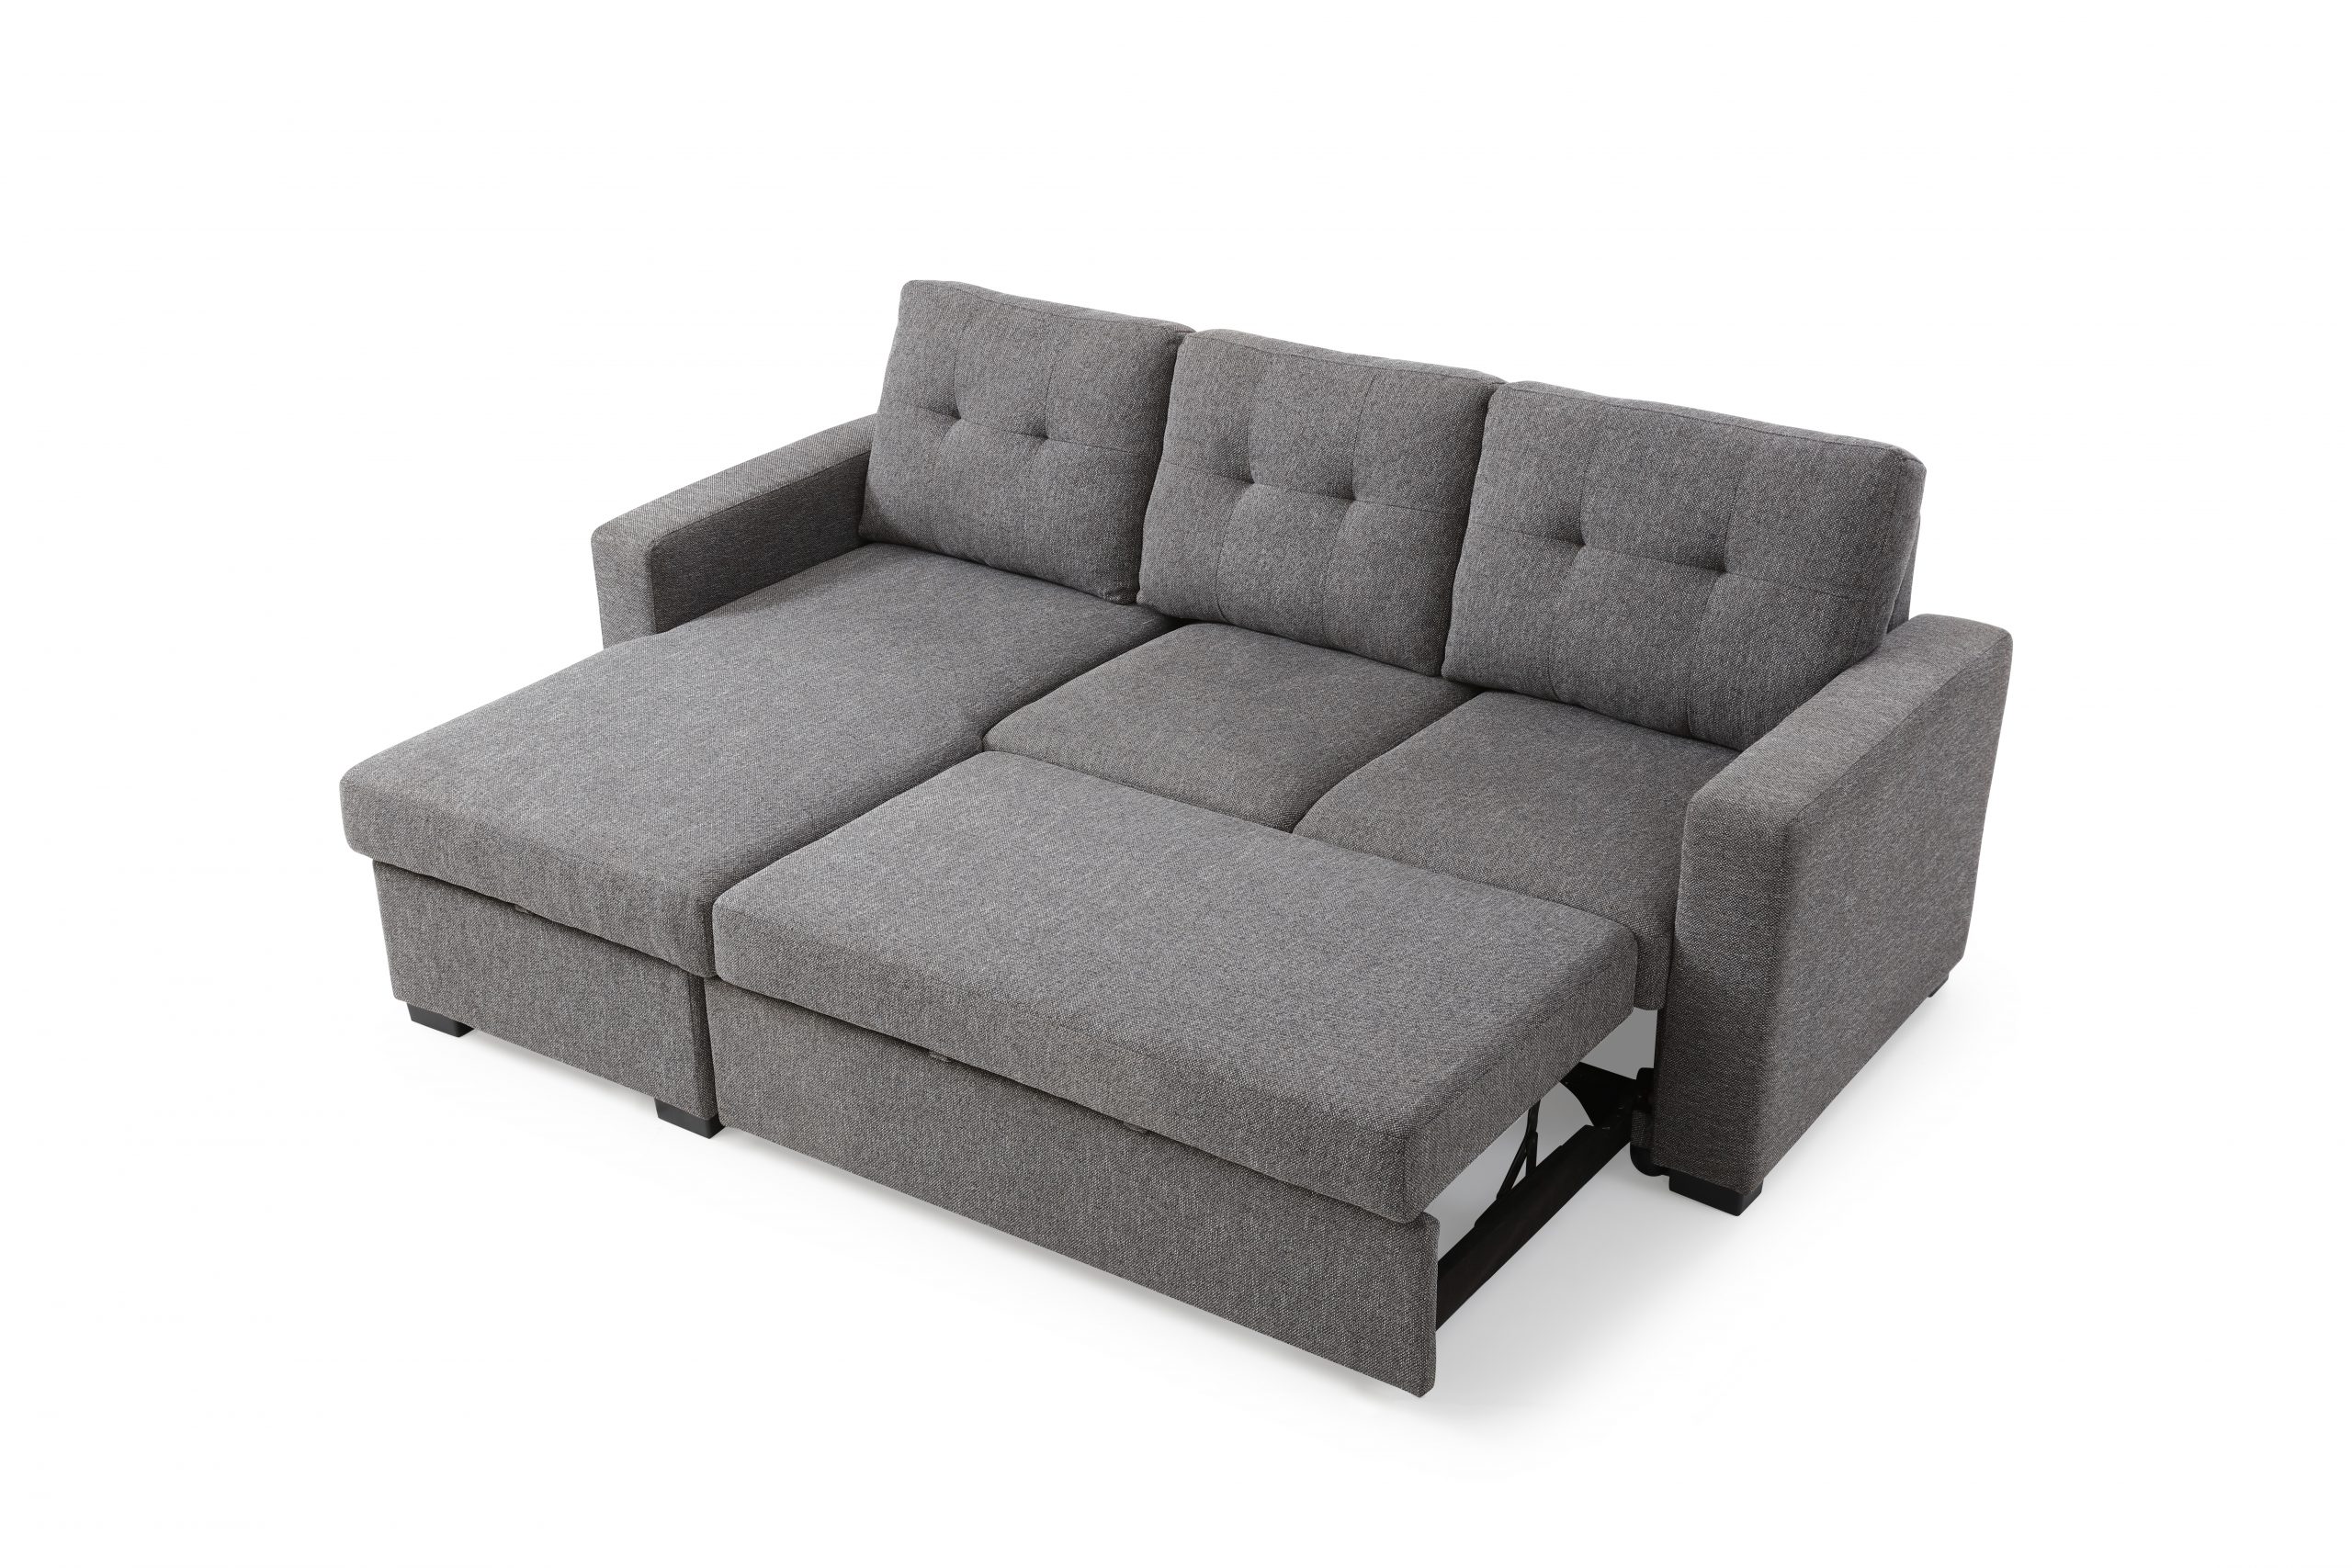 sofa bed cheap price